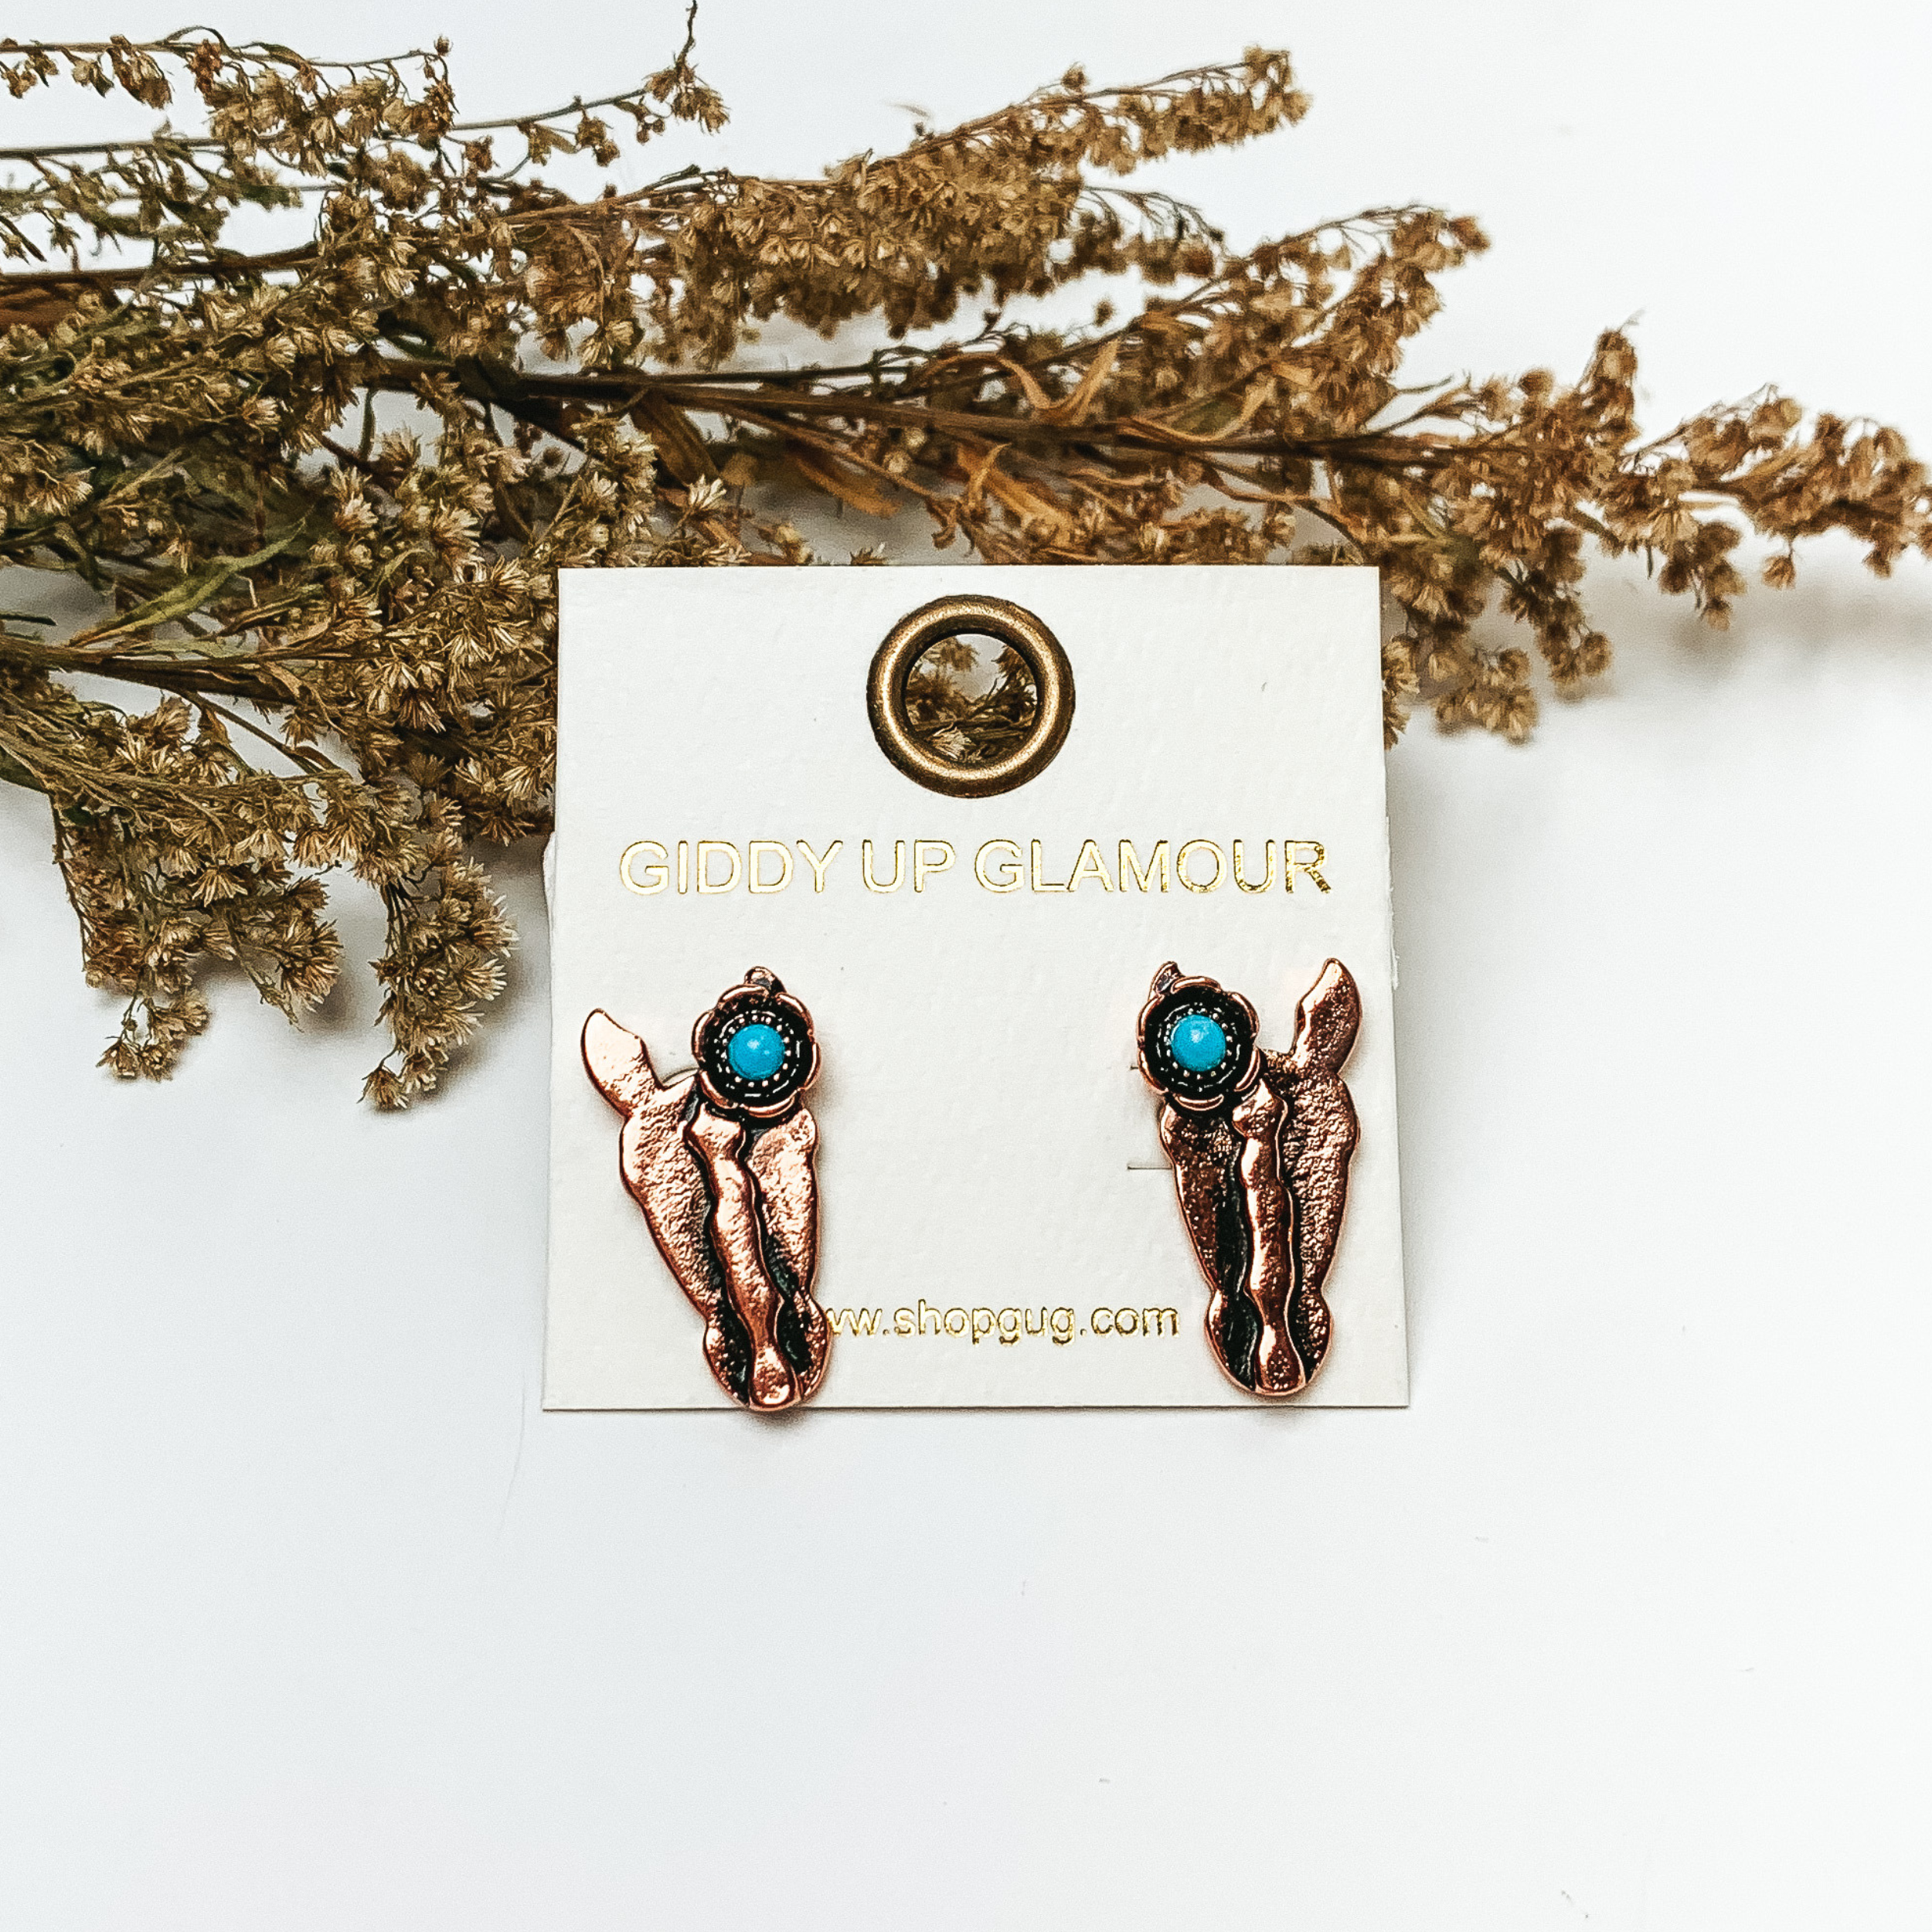 Horse Head Post Earrings in Copper Tone with Faux Turquoise Stone - Giddy Up Glamour Boutique